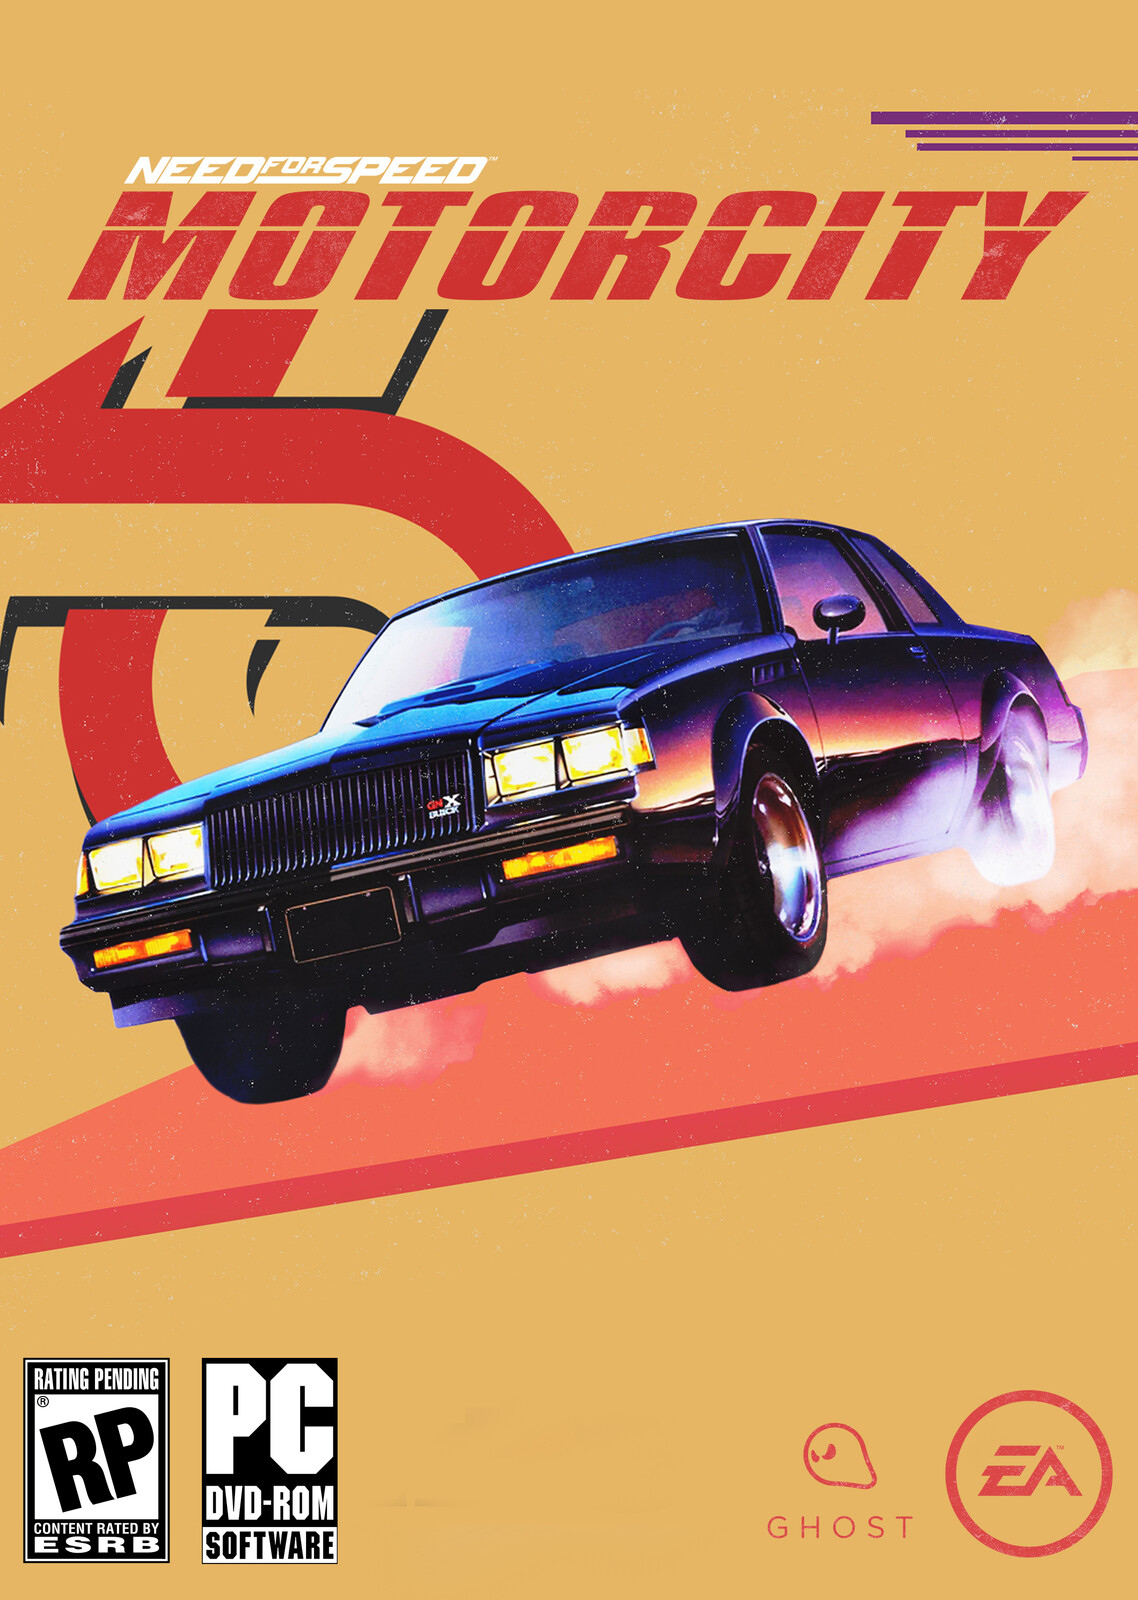 Need for Speed Motorcity (Old Cover - Original Idea)